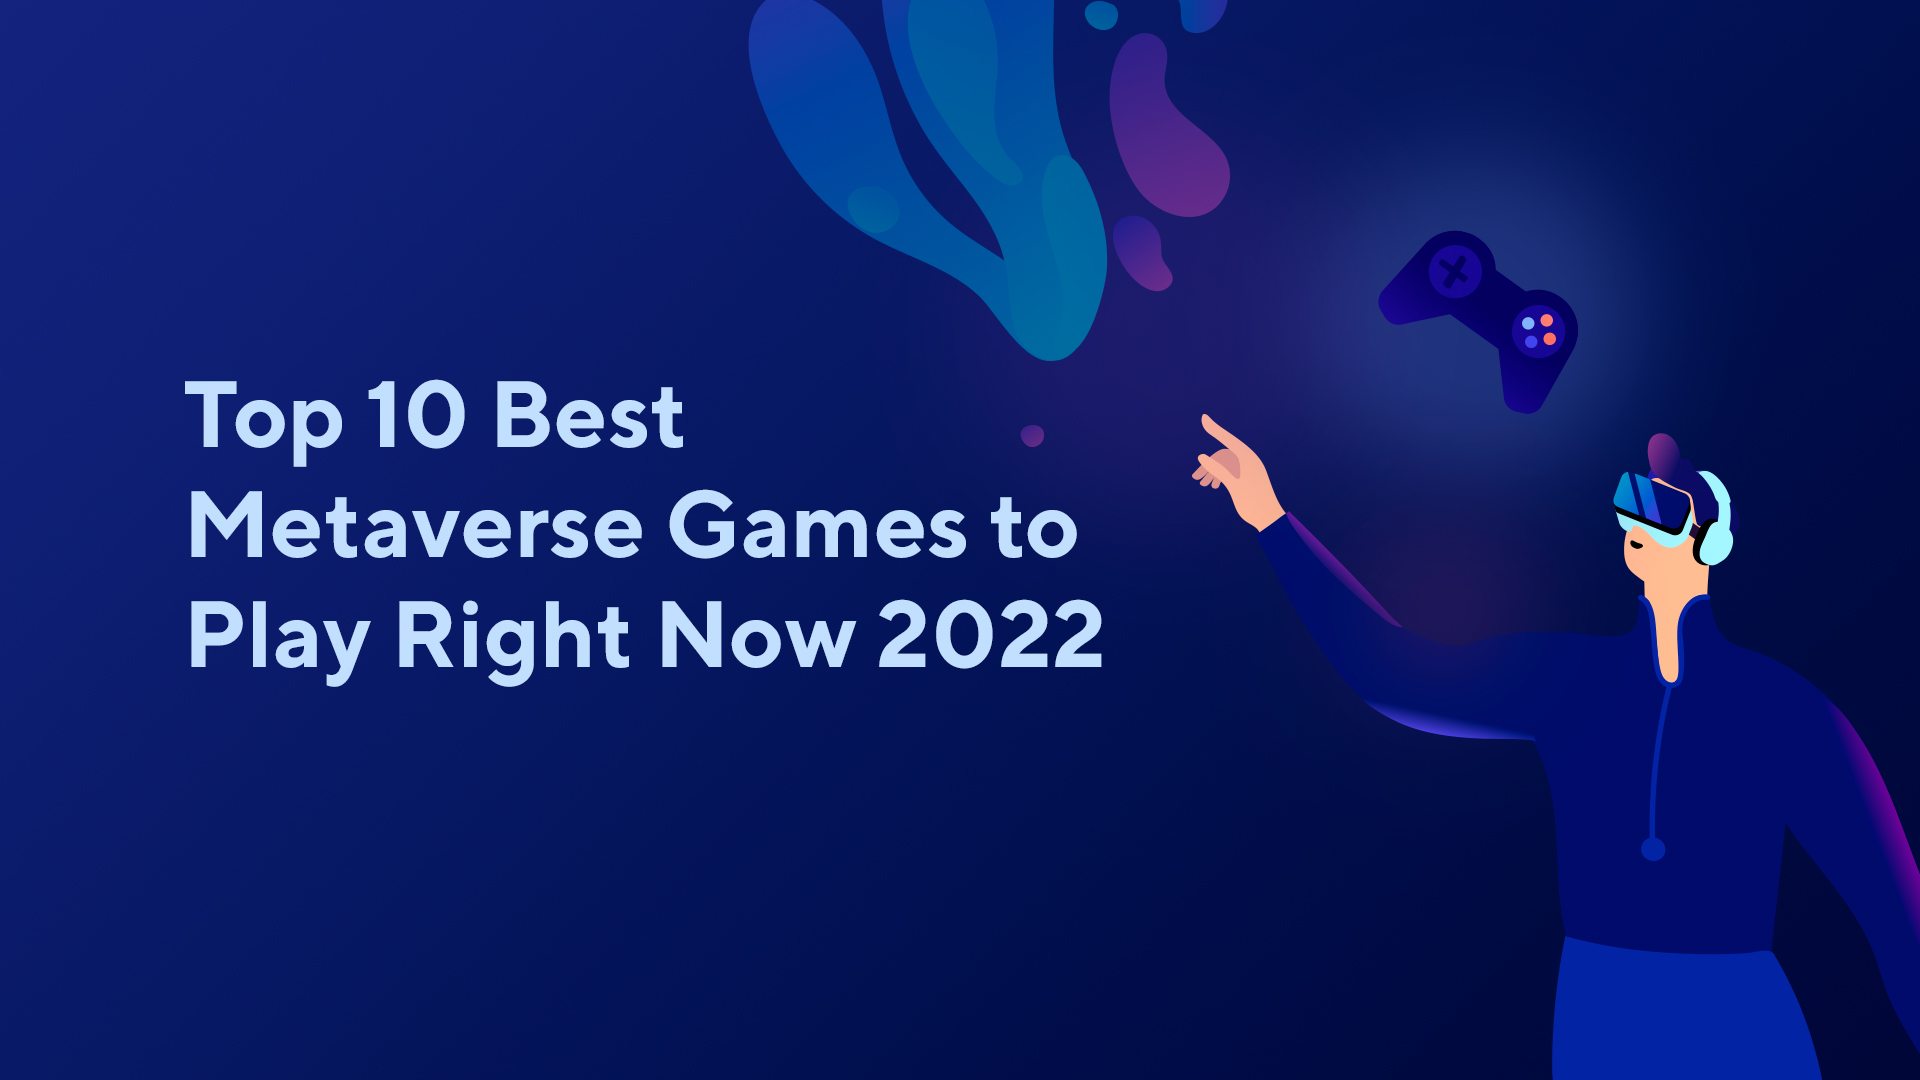 Top 10 Best Metaverse Games to Play Right Now 2022